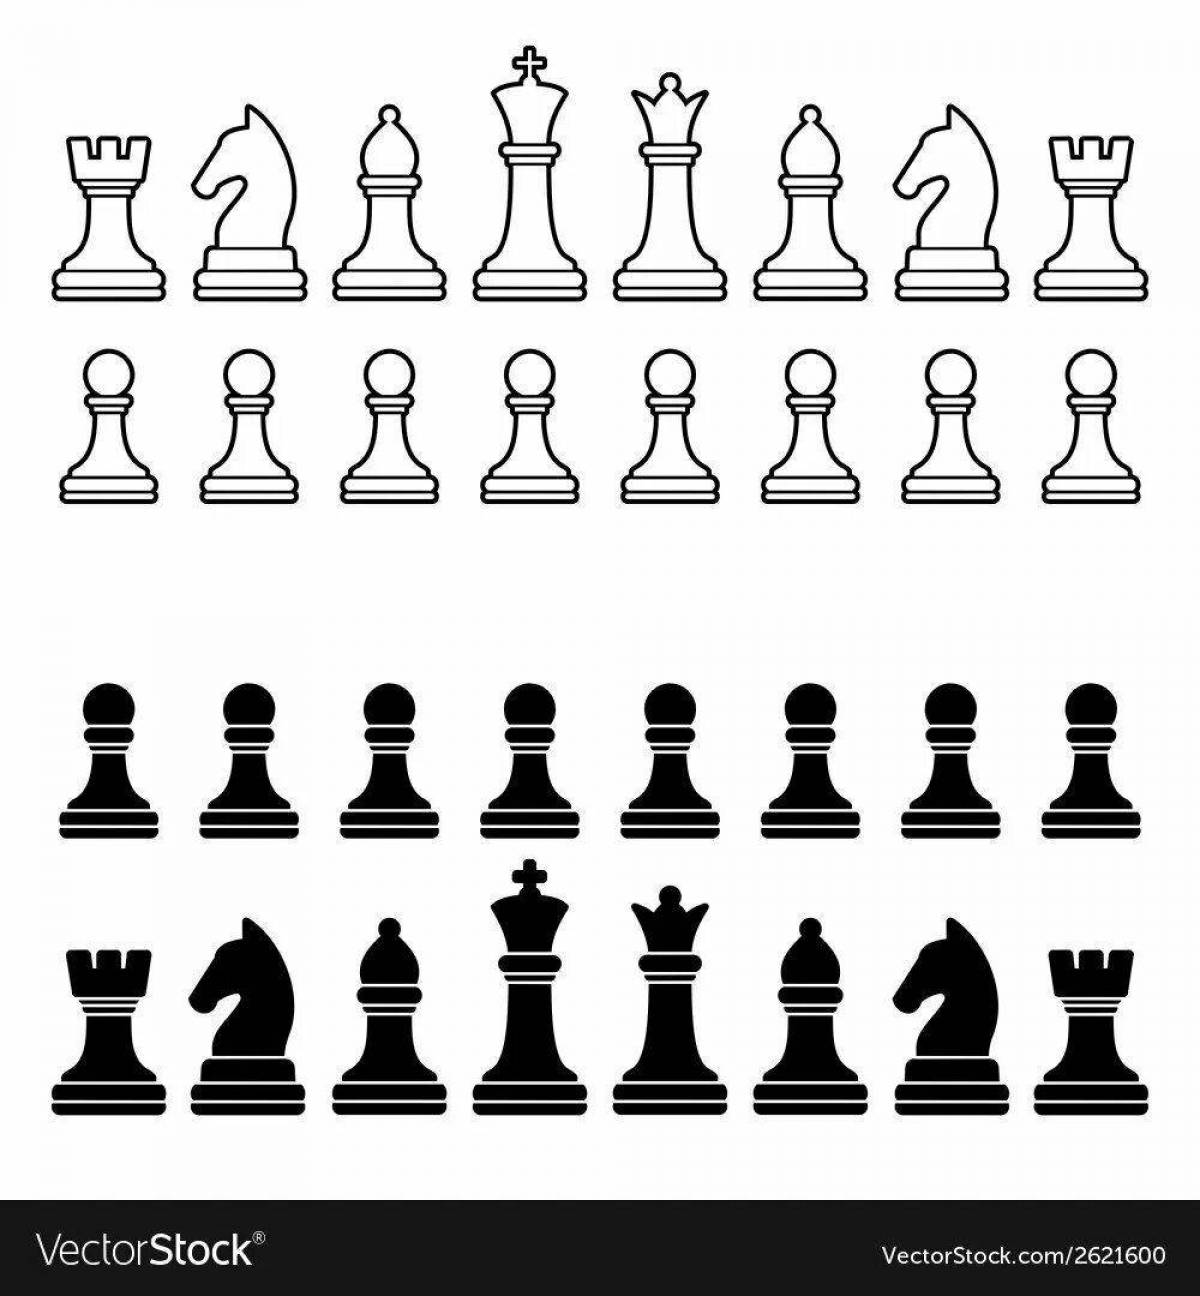 Coloring intricate chess pieces